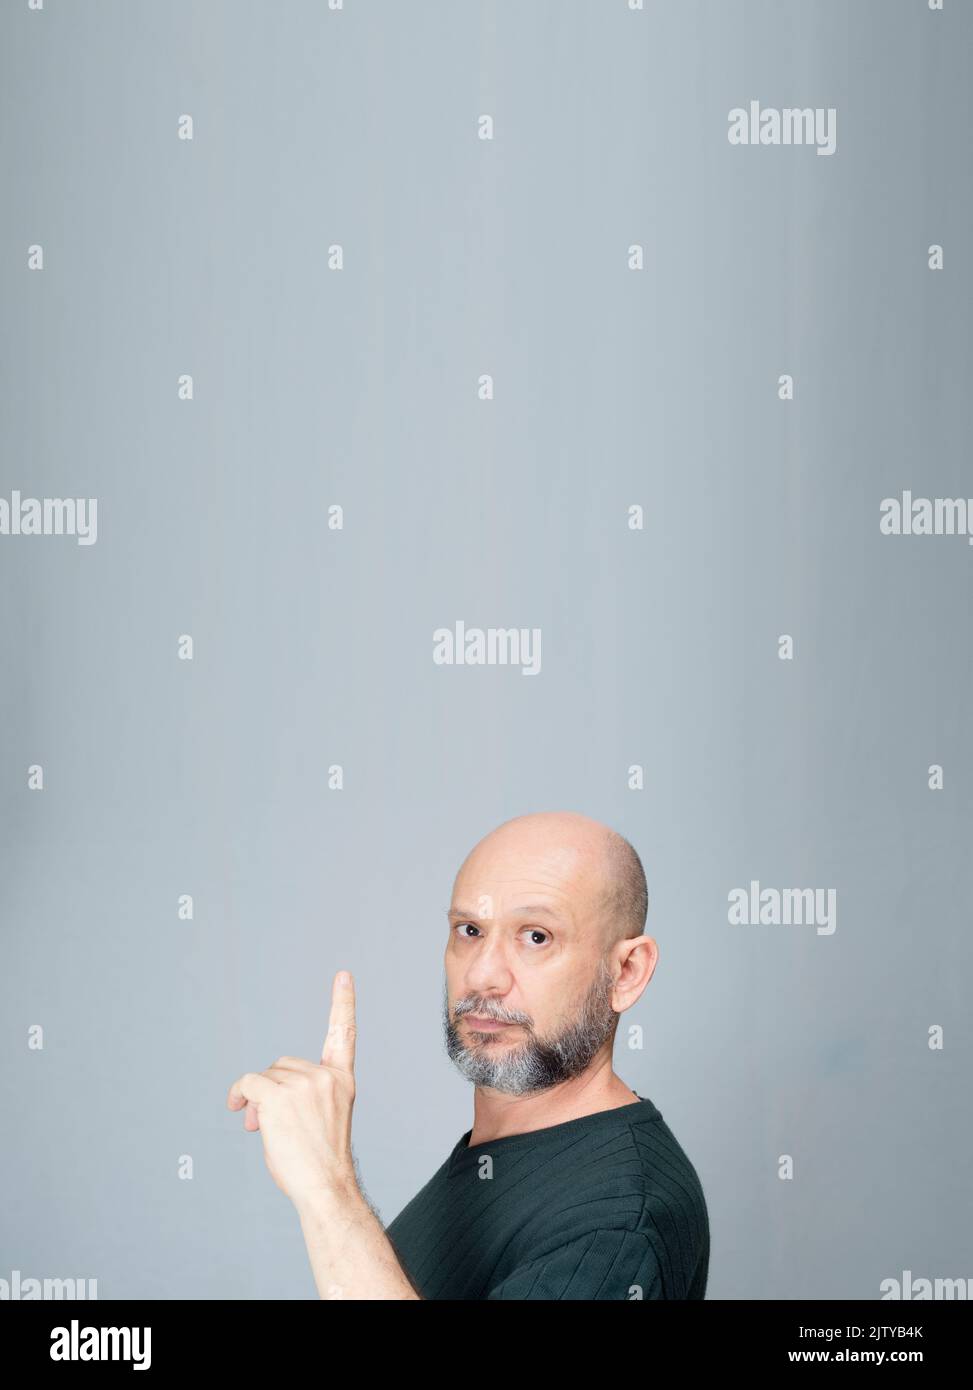 Portrait of mature man standing on white background. Bald bearded man making gestures. Formal style. Stock Photo